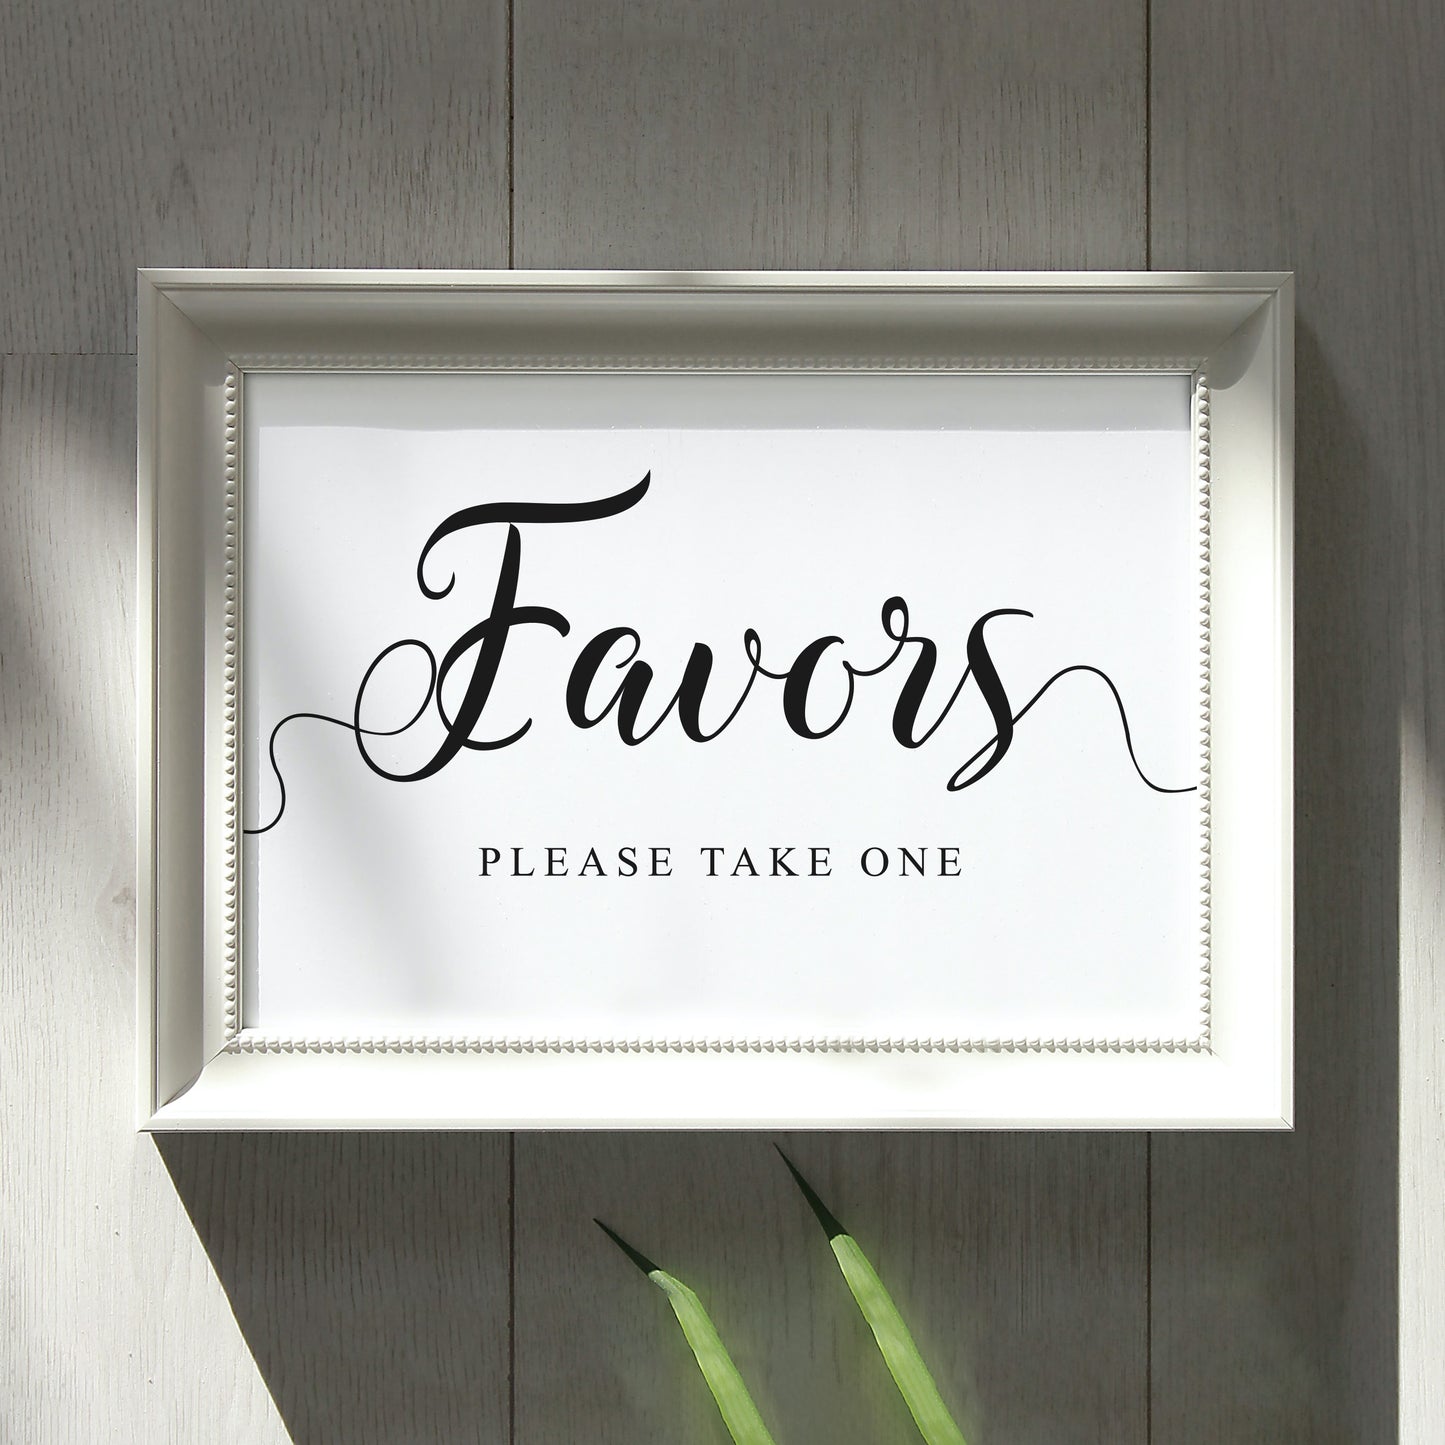 Wedding sign which reads Favors, please take one